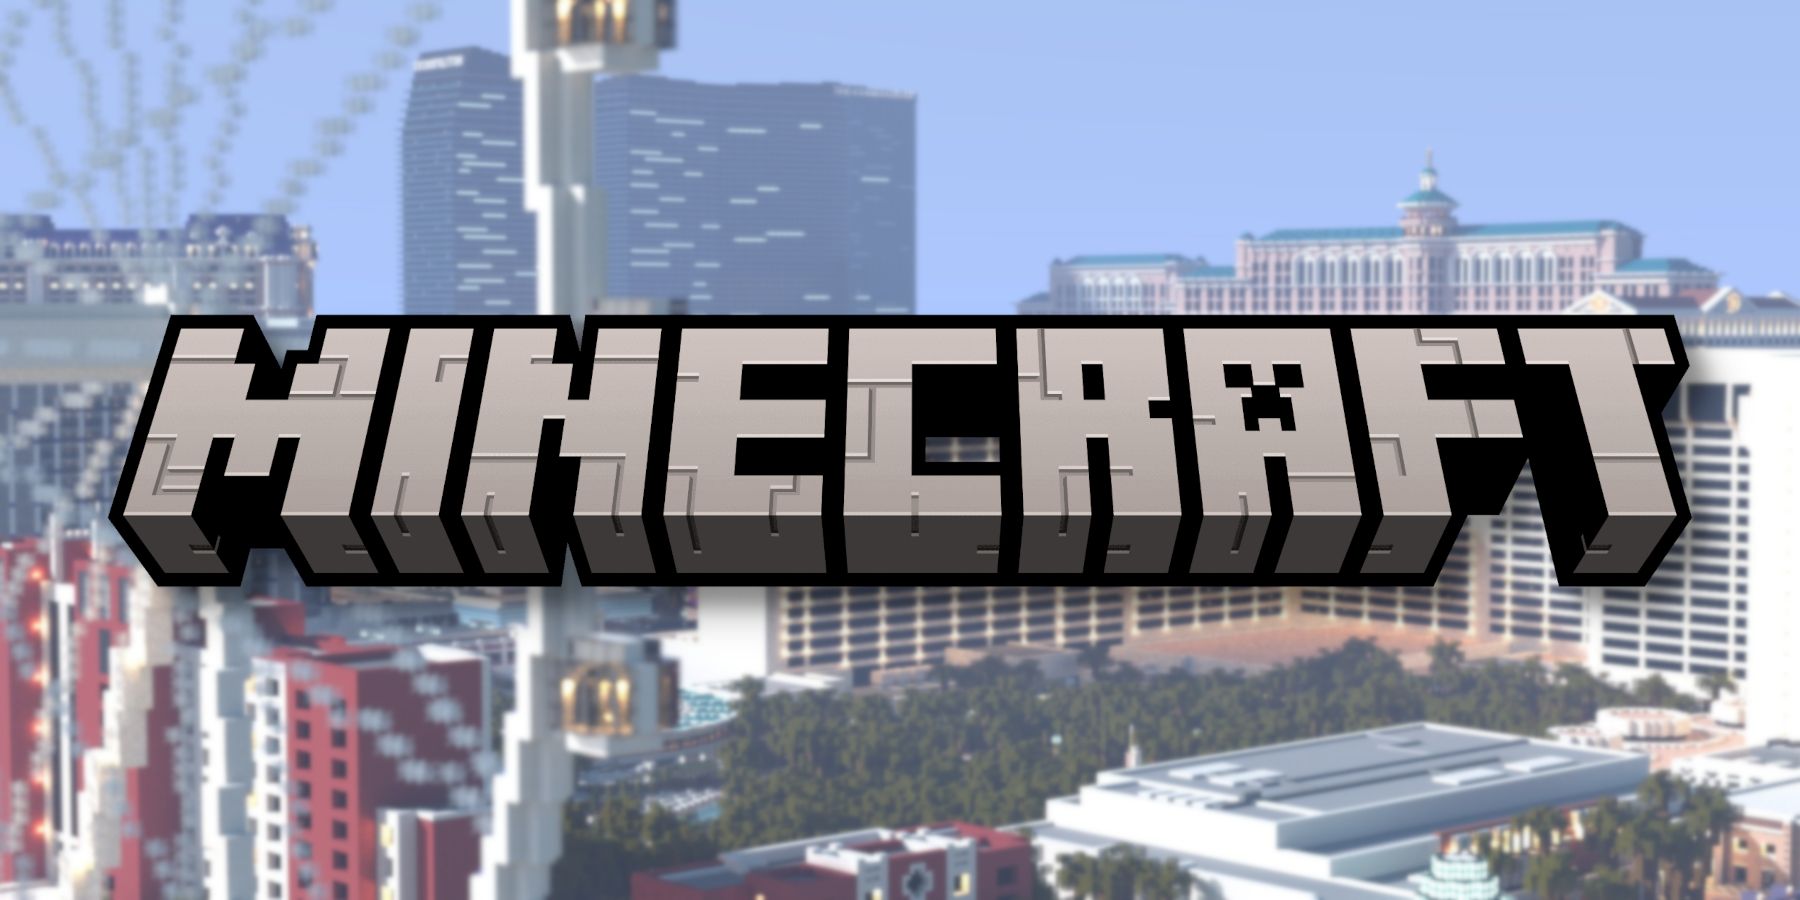 The Minecraft logo with a view of a Las Vegas replica behind it.